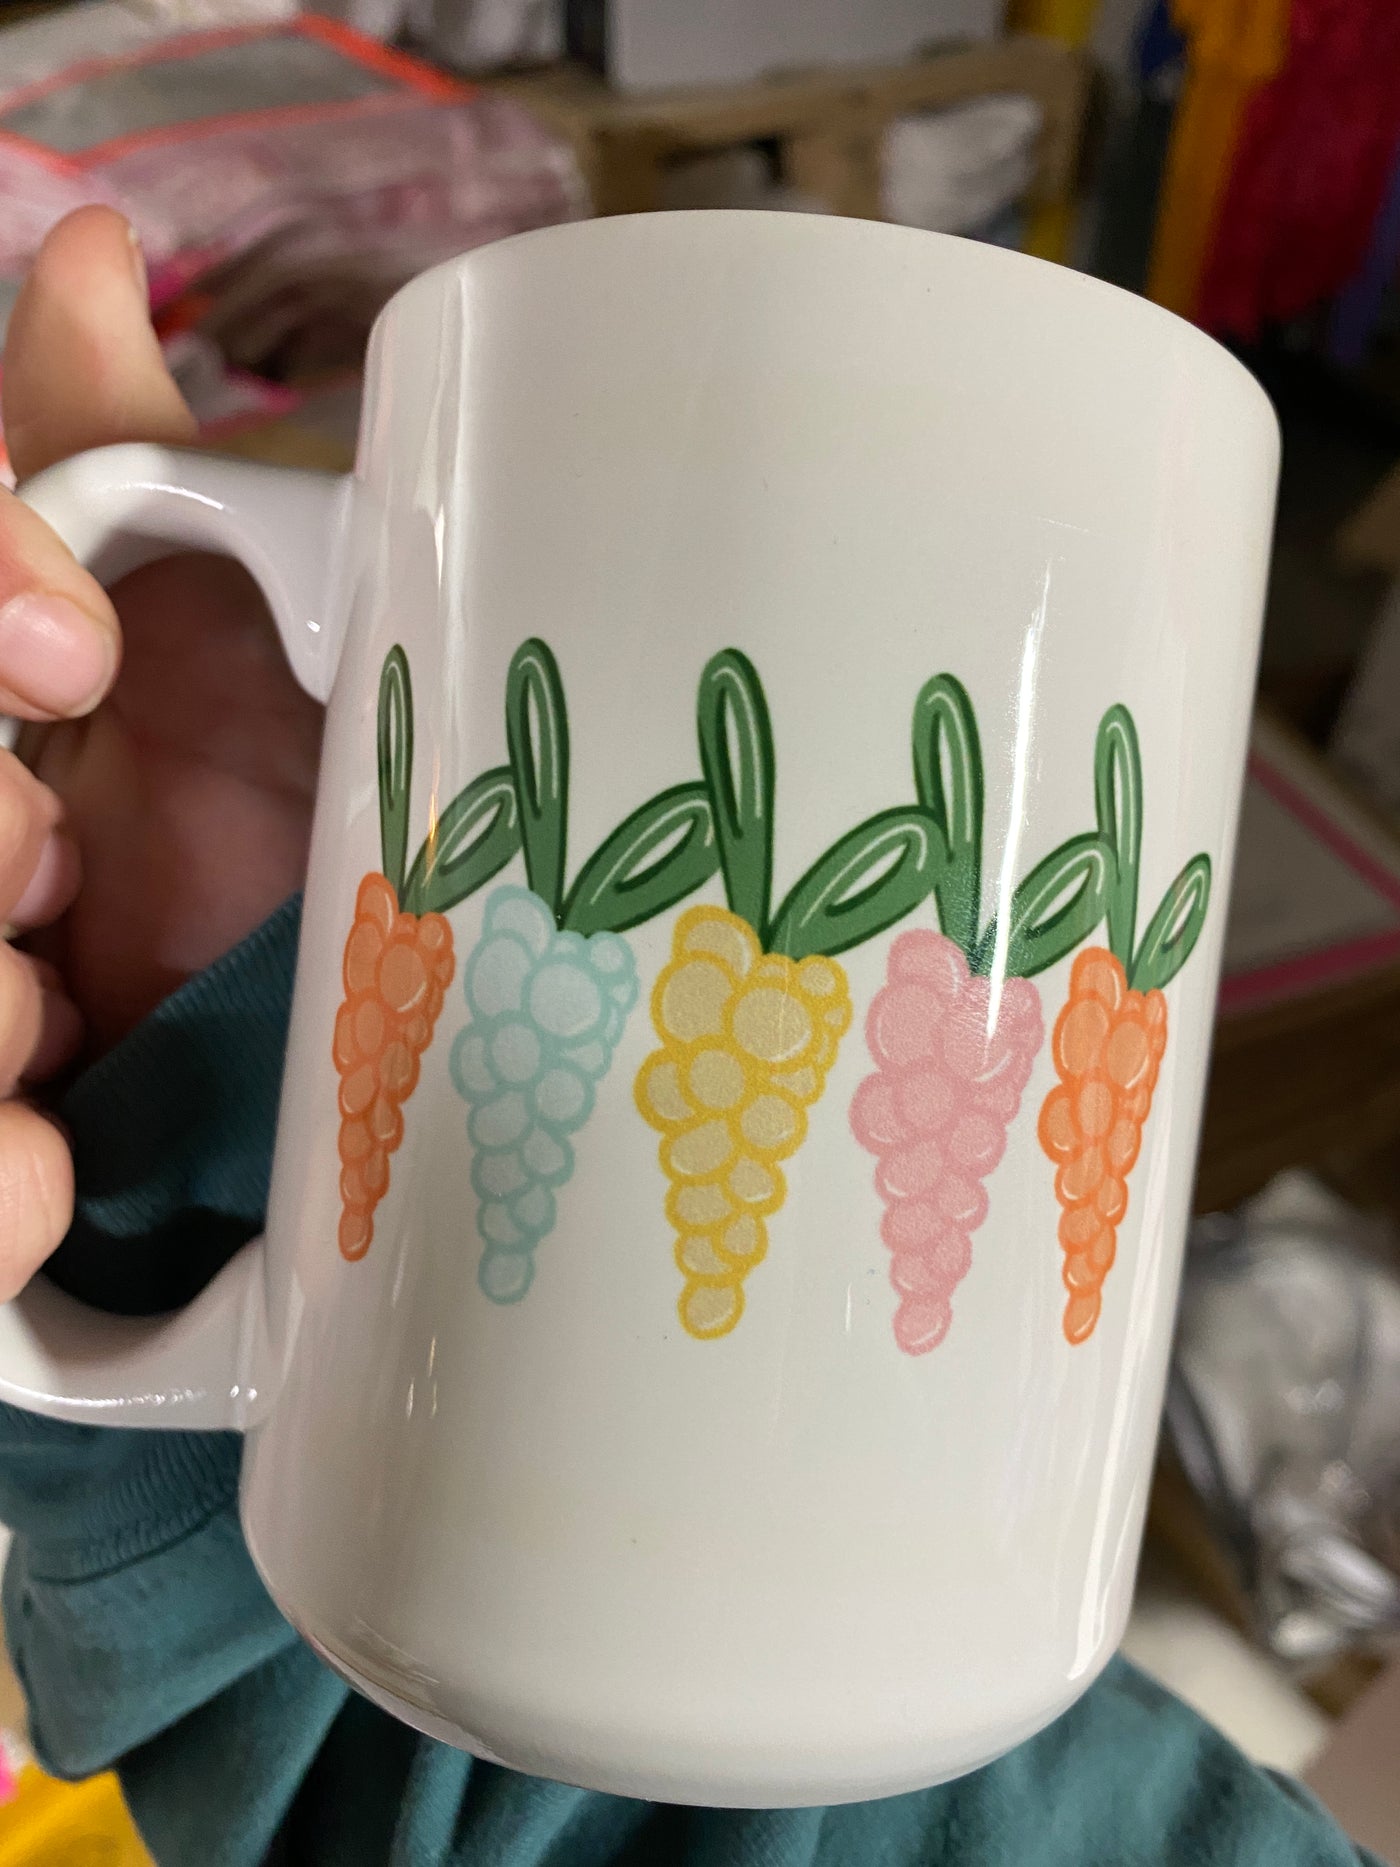 Hand holding a coffee mug. Coffee Mug has carrots made of bubbles in pastel colors